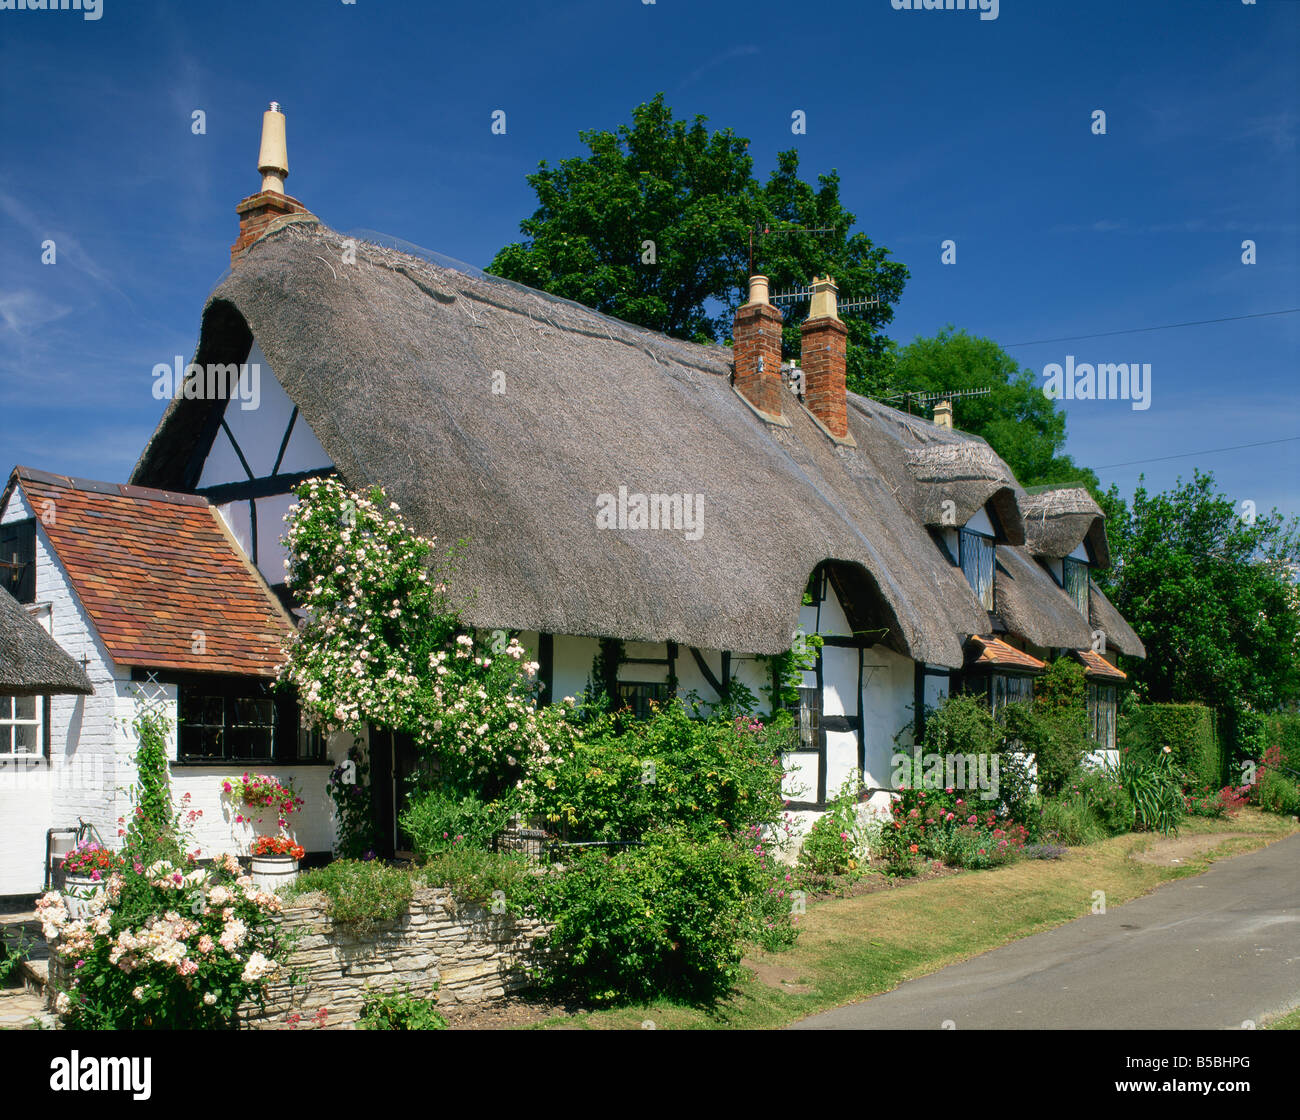 Thatched cottage at Welford on Avon in Warwickshire England United Kingdom Europe Stock Photo